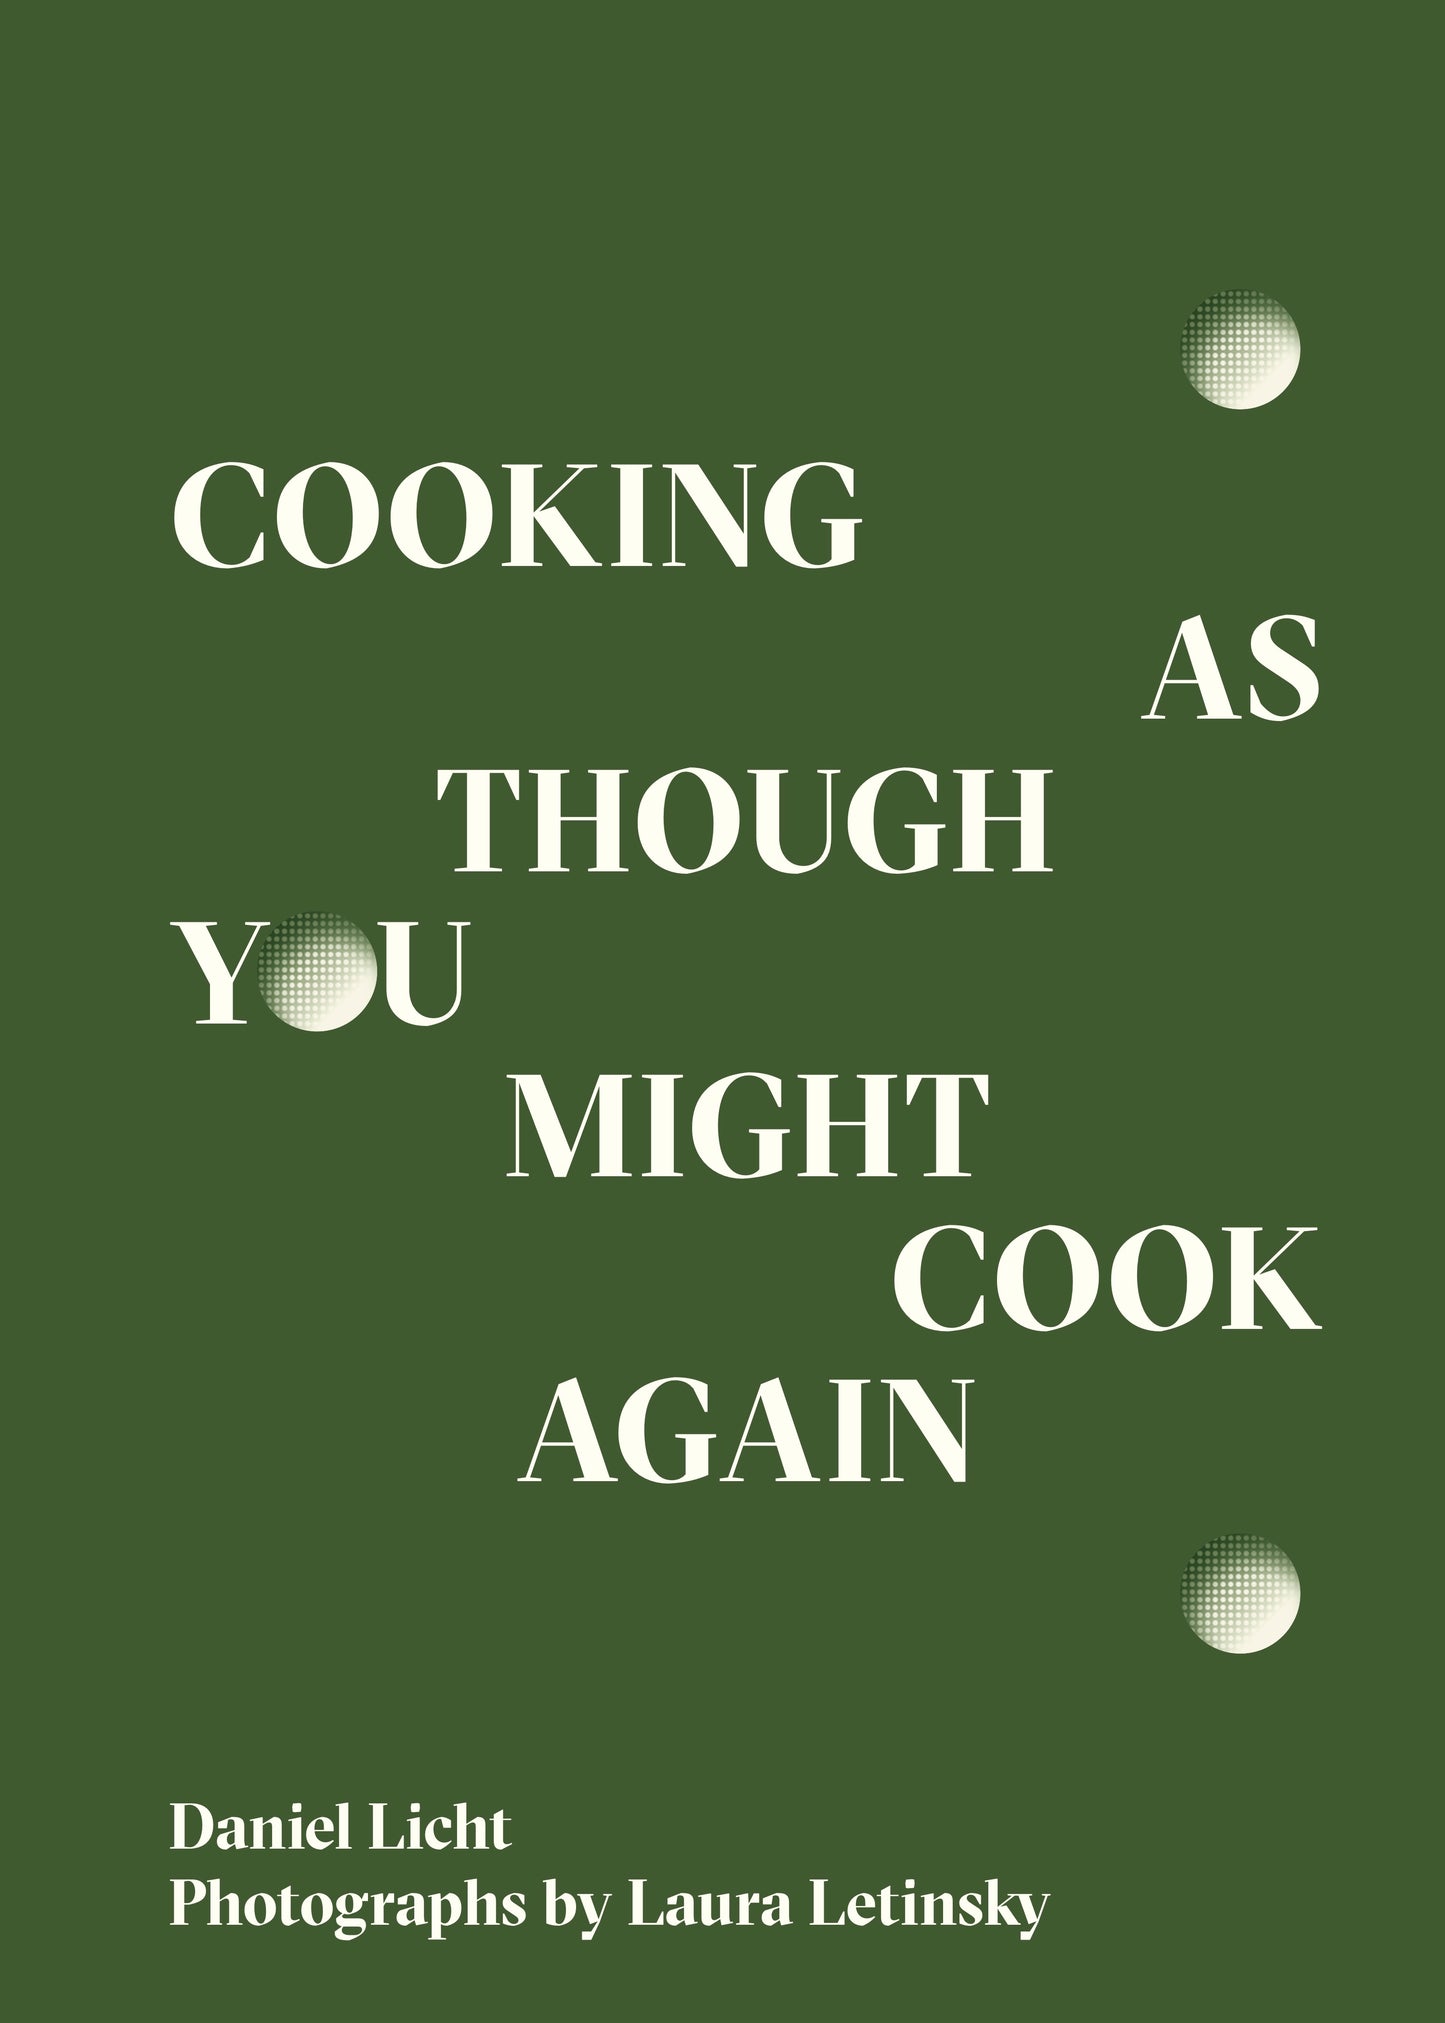 Cooking As Though You Might Cook Again